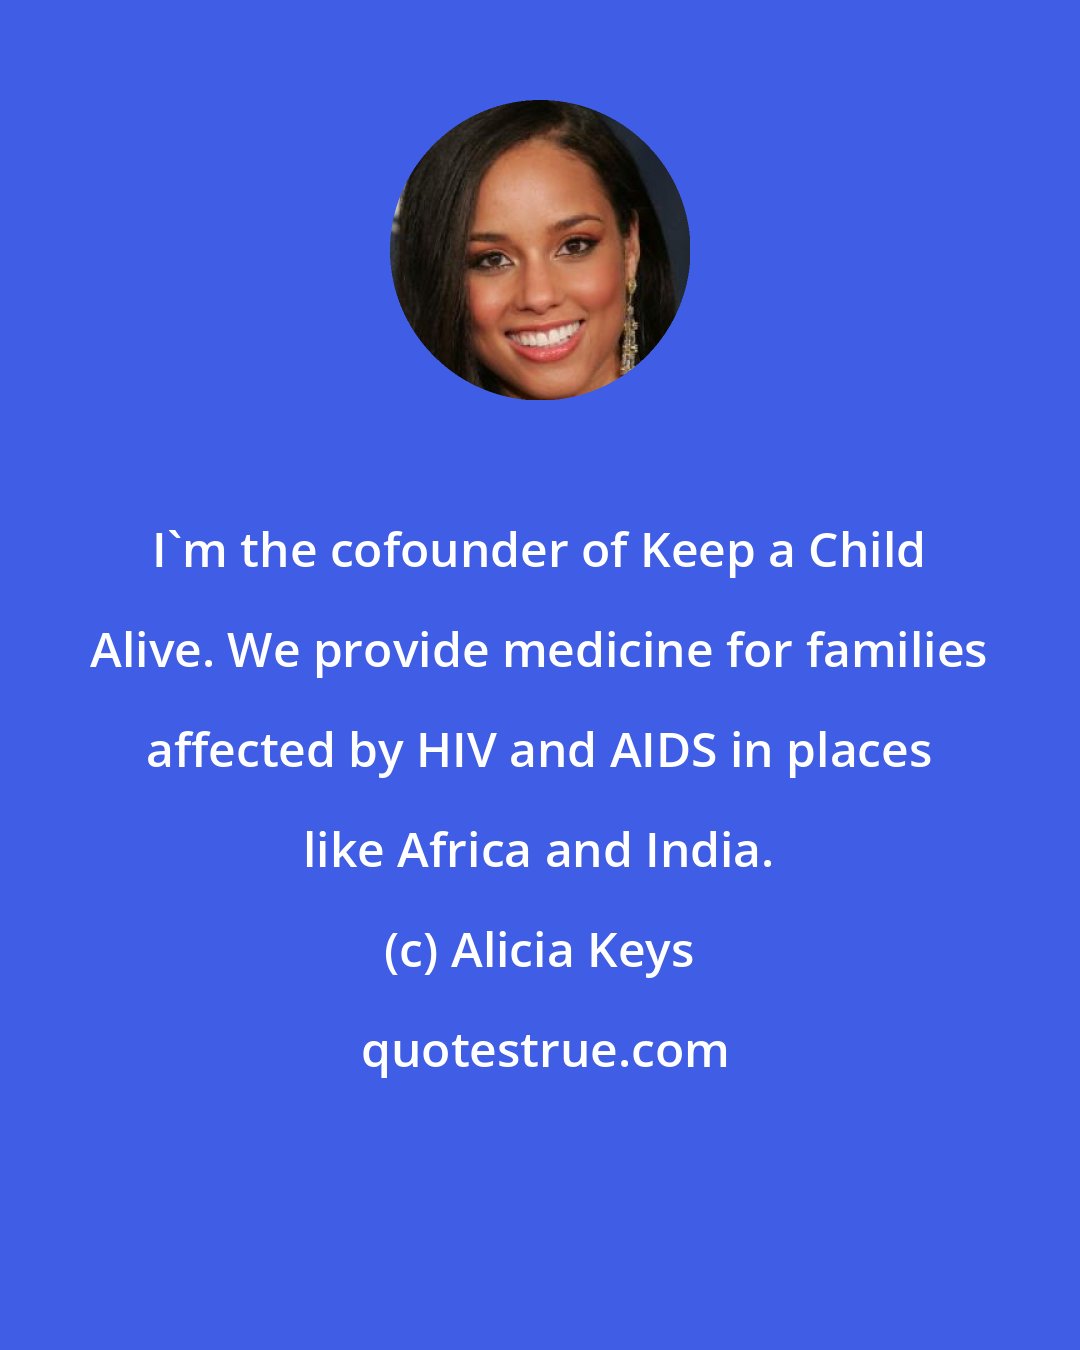 Alicia Keys: I'm the cofounder of Keep a Child Alive. We provide medicine for families affected by HIV and AIDS in places like Africa and India.